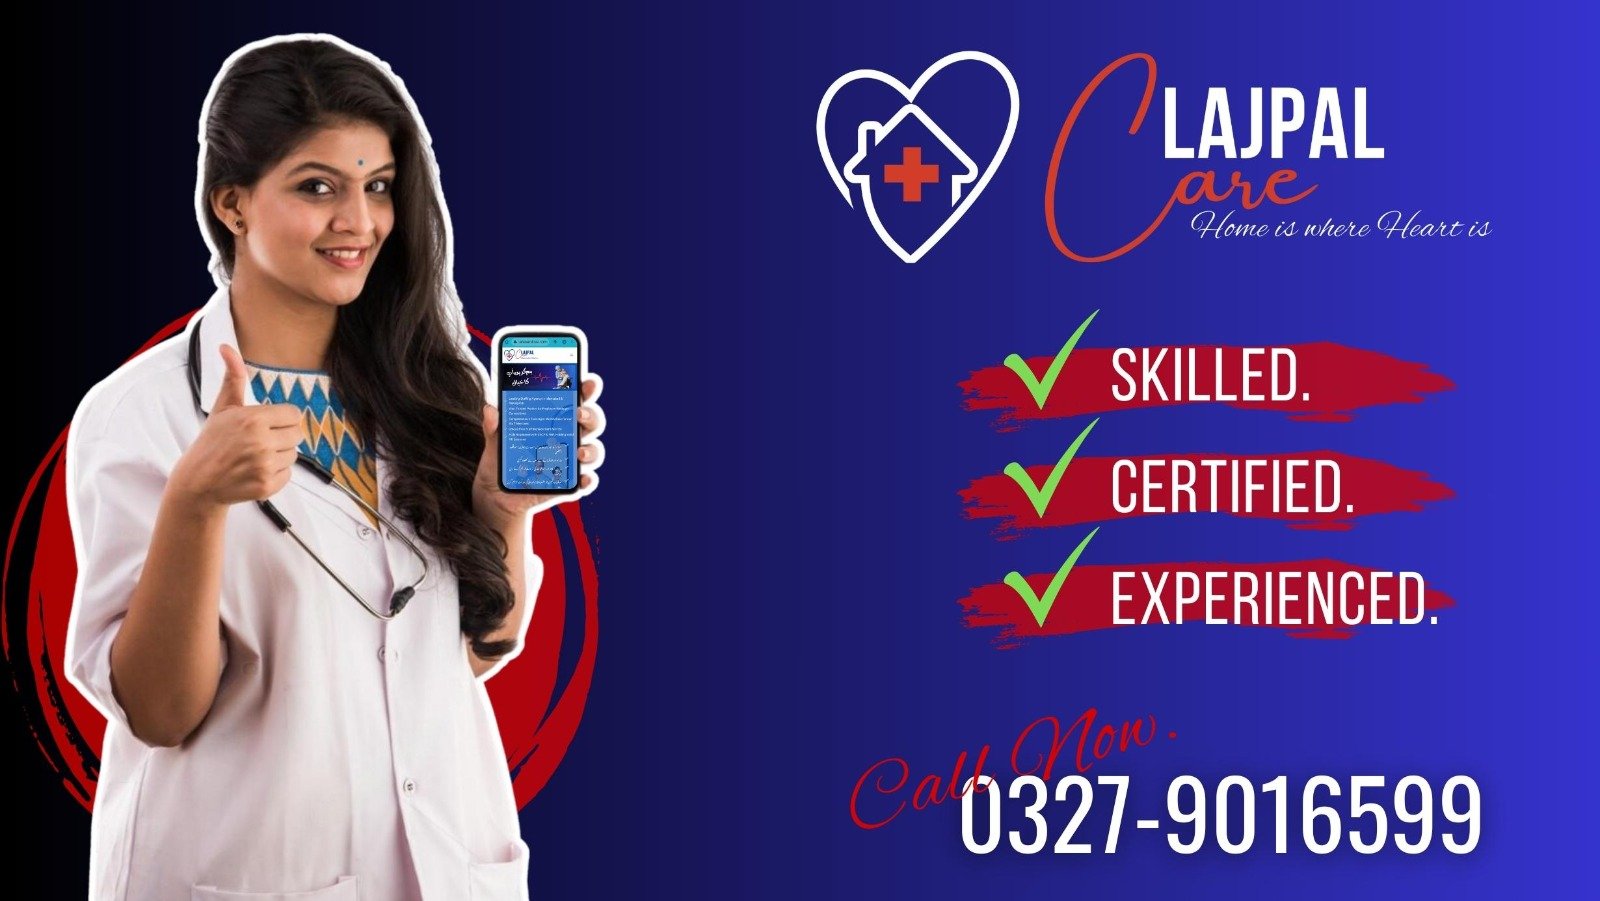 Why Lajpal Care is the Best Choice for Your Loved Ones: